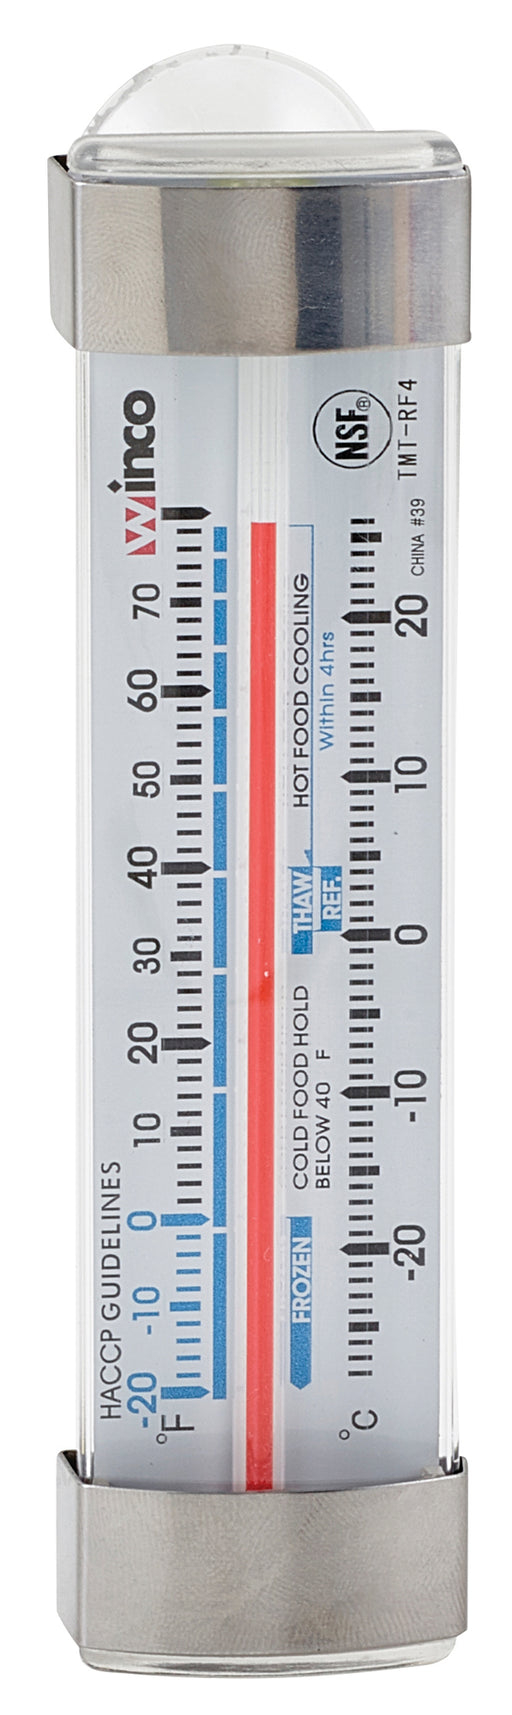 Freezer/Refrig Thermometer, 3-1/2"L, Suction Cup (12 Each)-cityfoodequipment.com